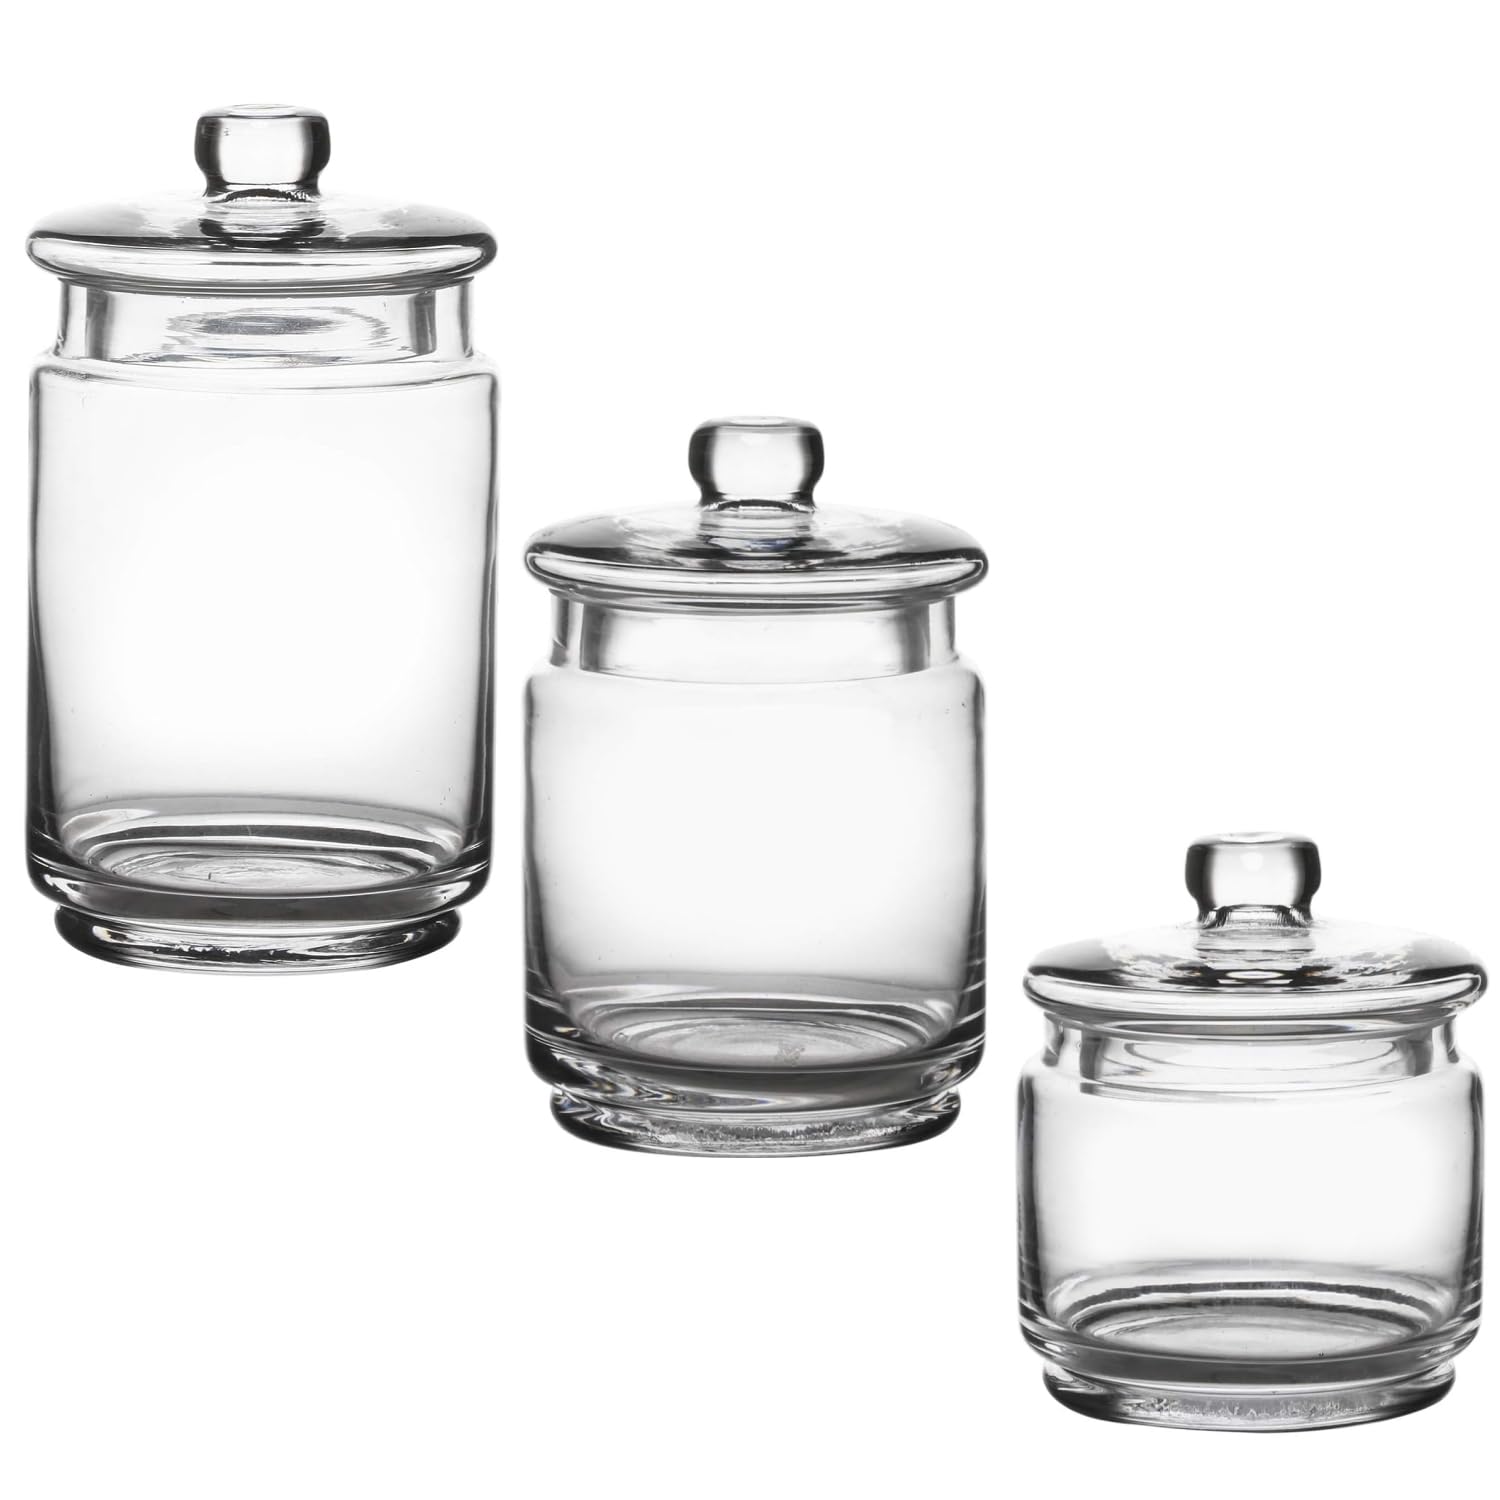 WHOLE HOUSEWARES Glass Apothecary Jars with Lids - Set of 3 for Bathroom Storage, Qtip & Cotton Swab Holder - Perfect for Laundry Room & Makeup Desk Organization, Clear Glass Container Set